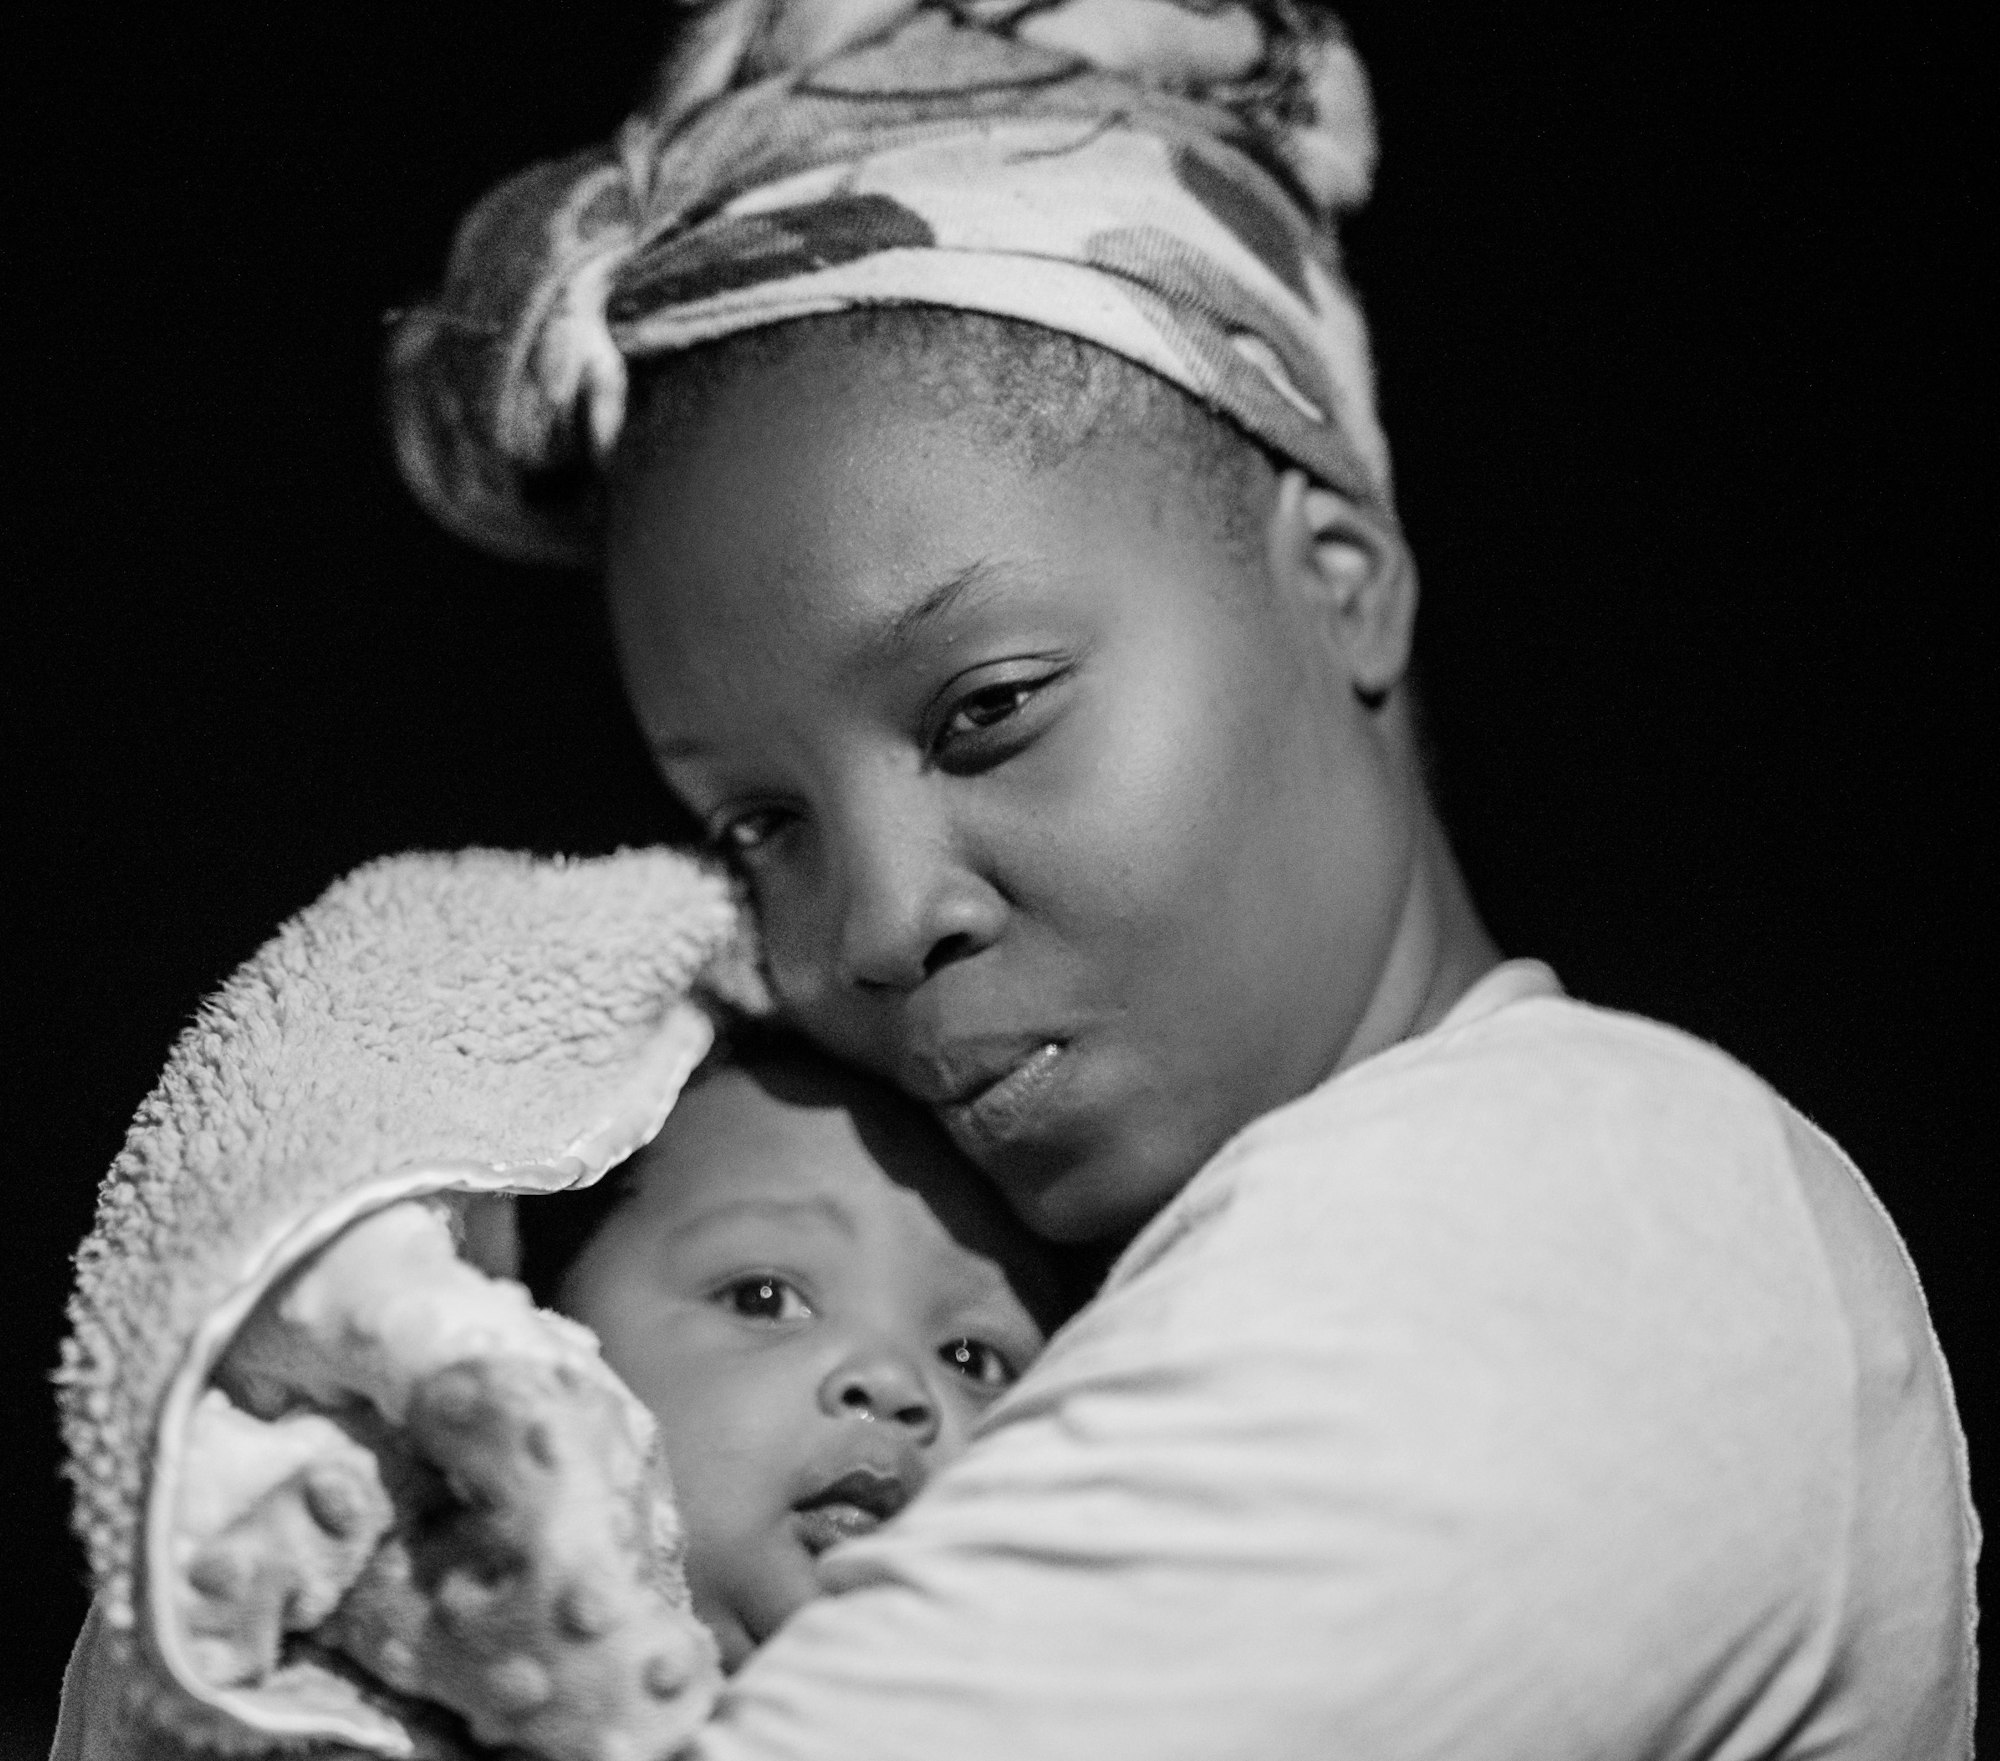 MOTHERS LOVE

Please Give Credit To Photographer: 
📸By: Andrae B. Ricketts
Instagram:https://www.instagram.com/alttr_photography/
